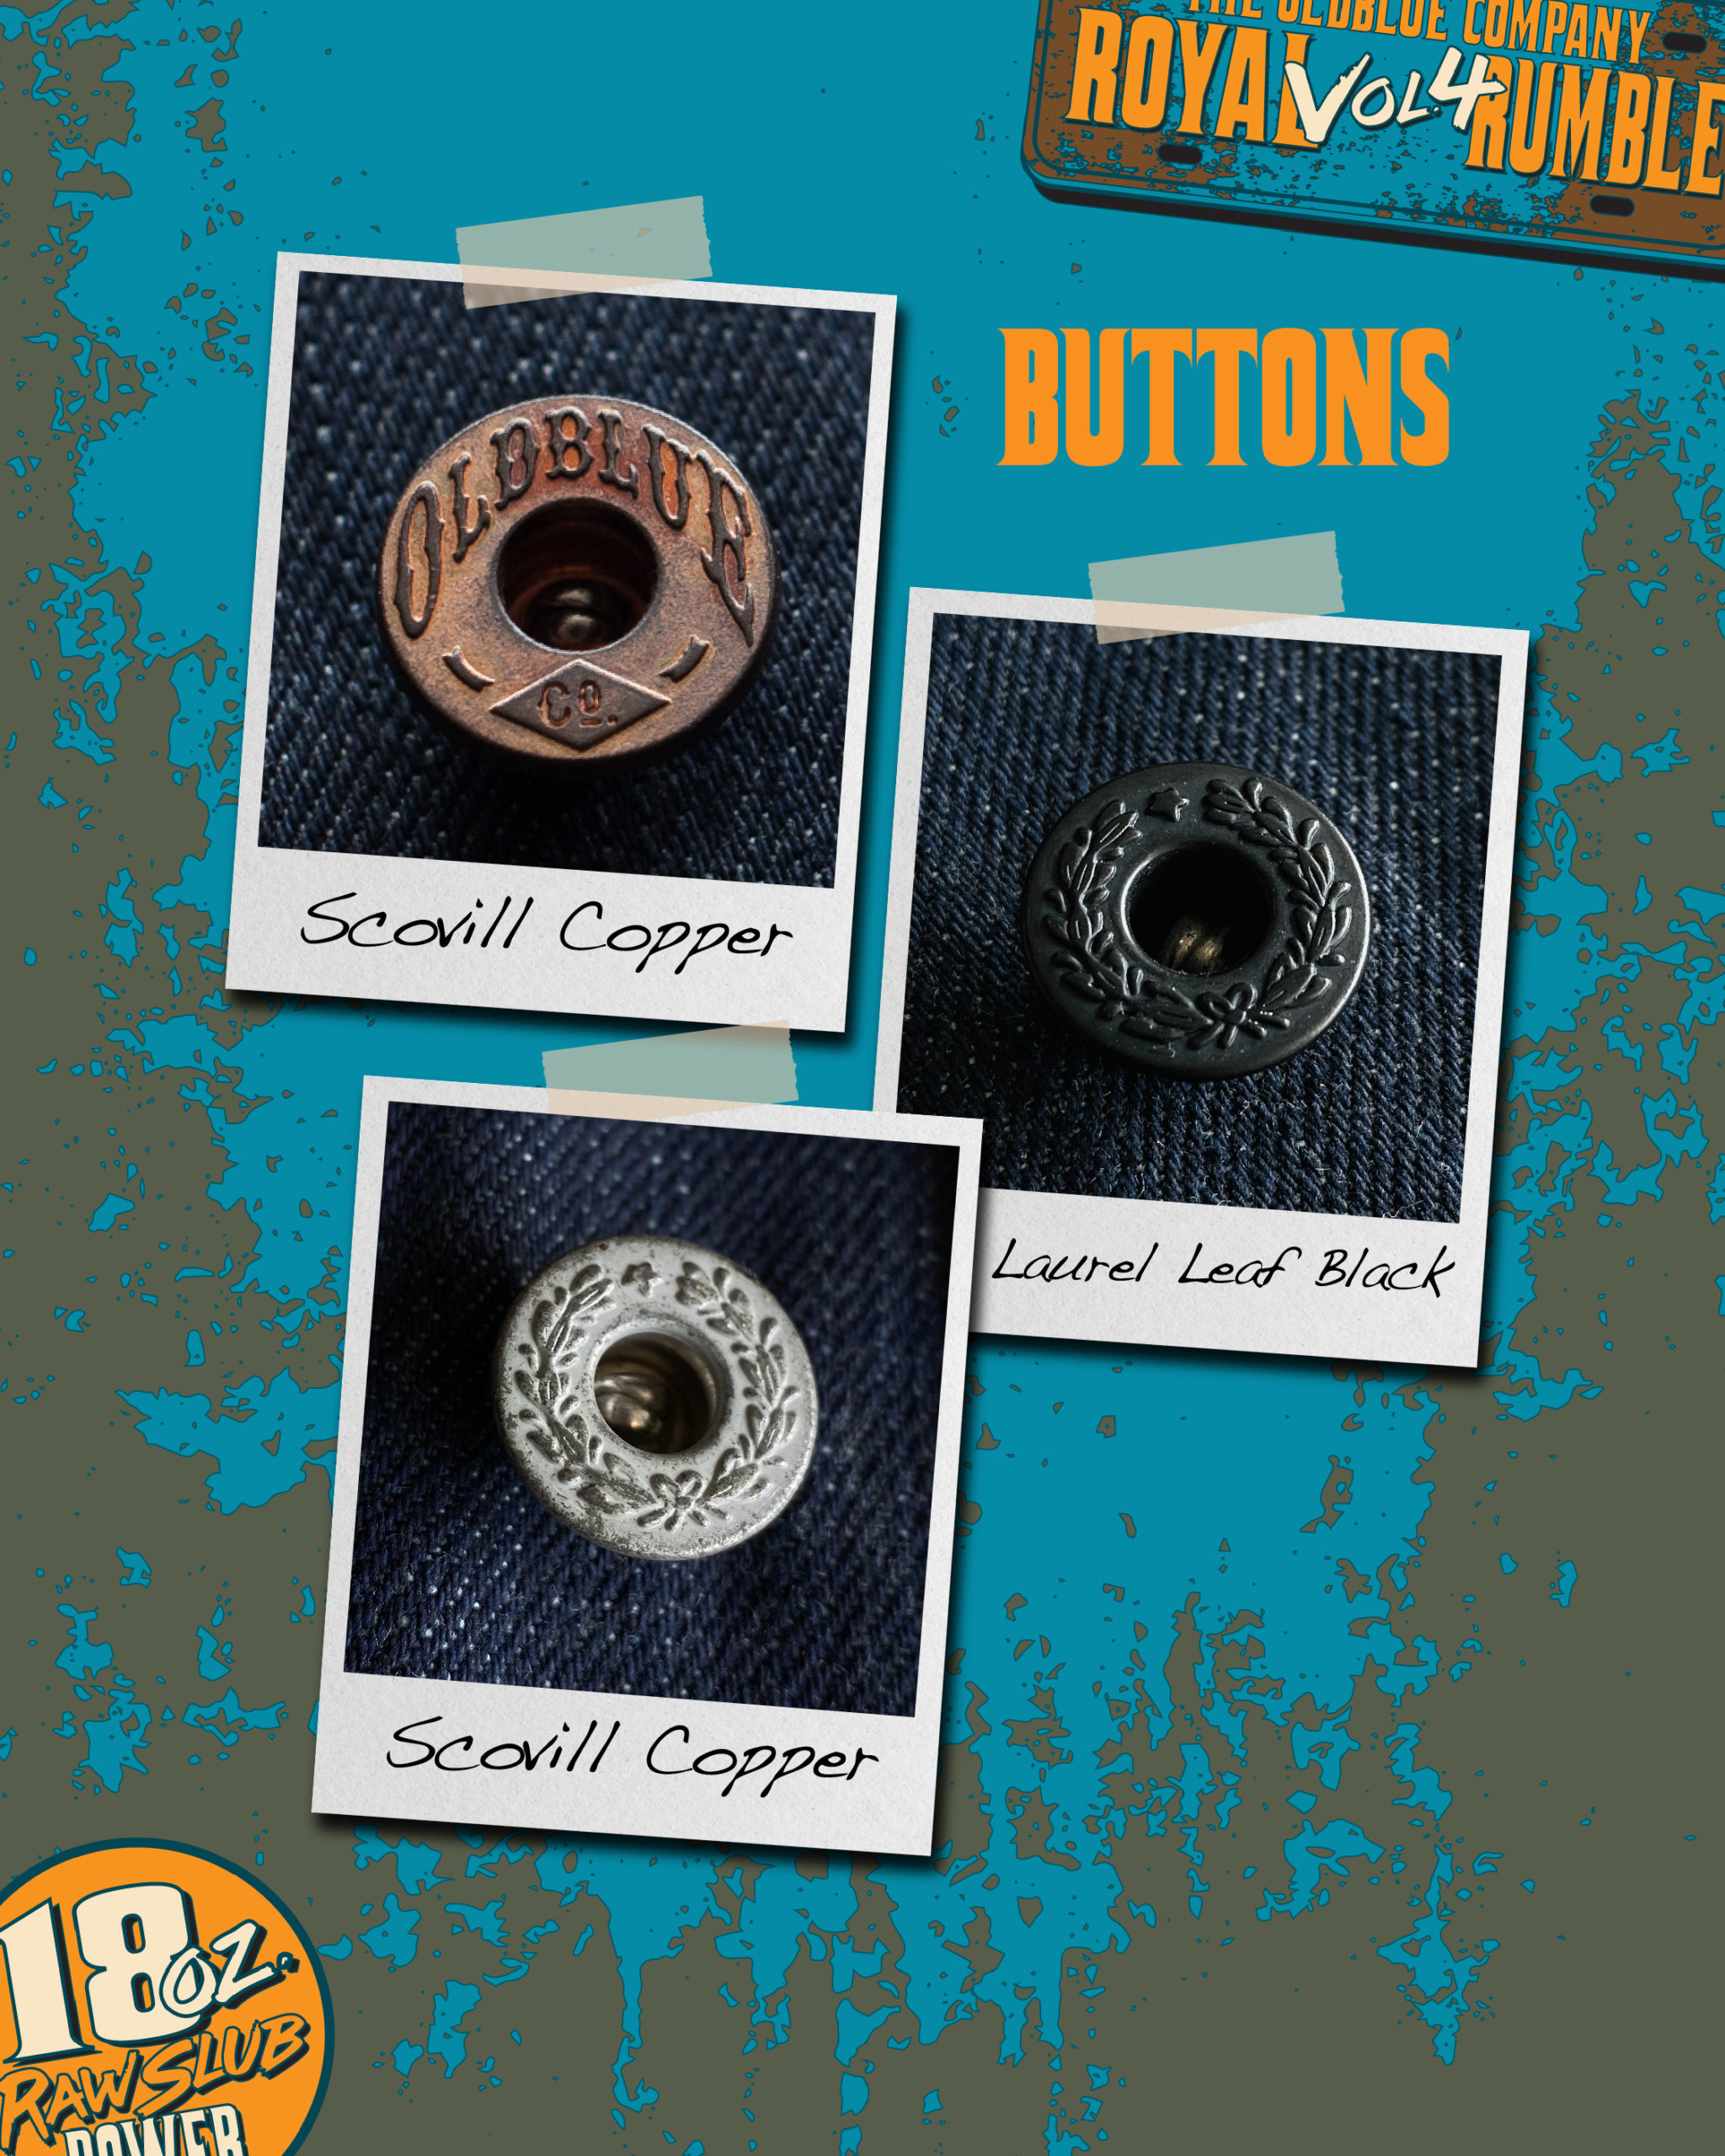 THE BUTTON SELECTION